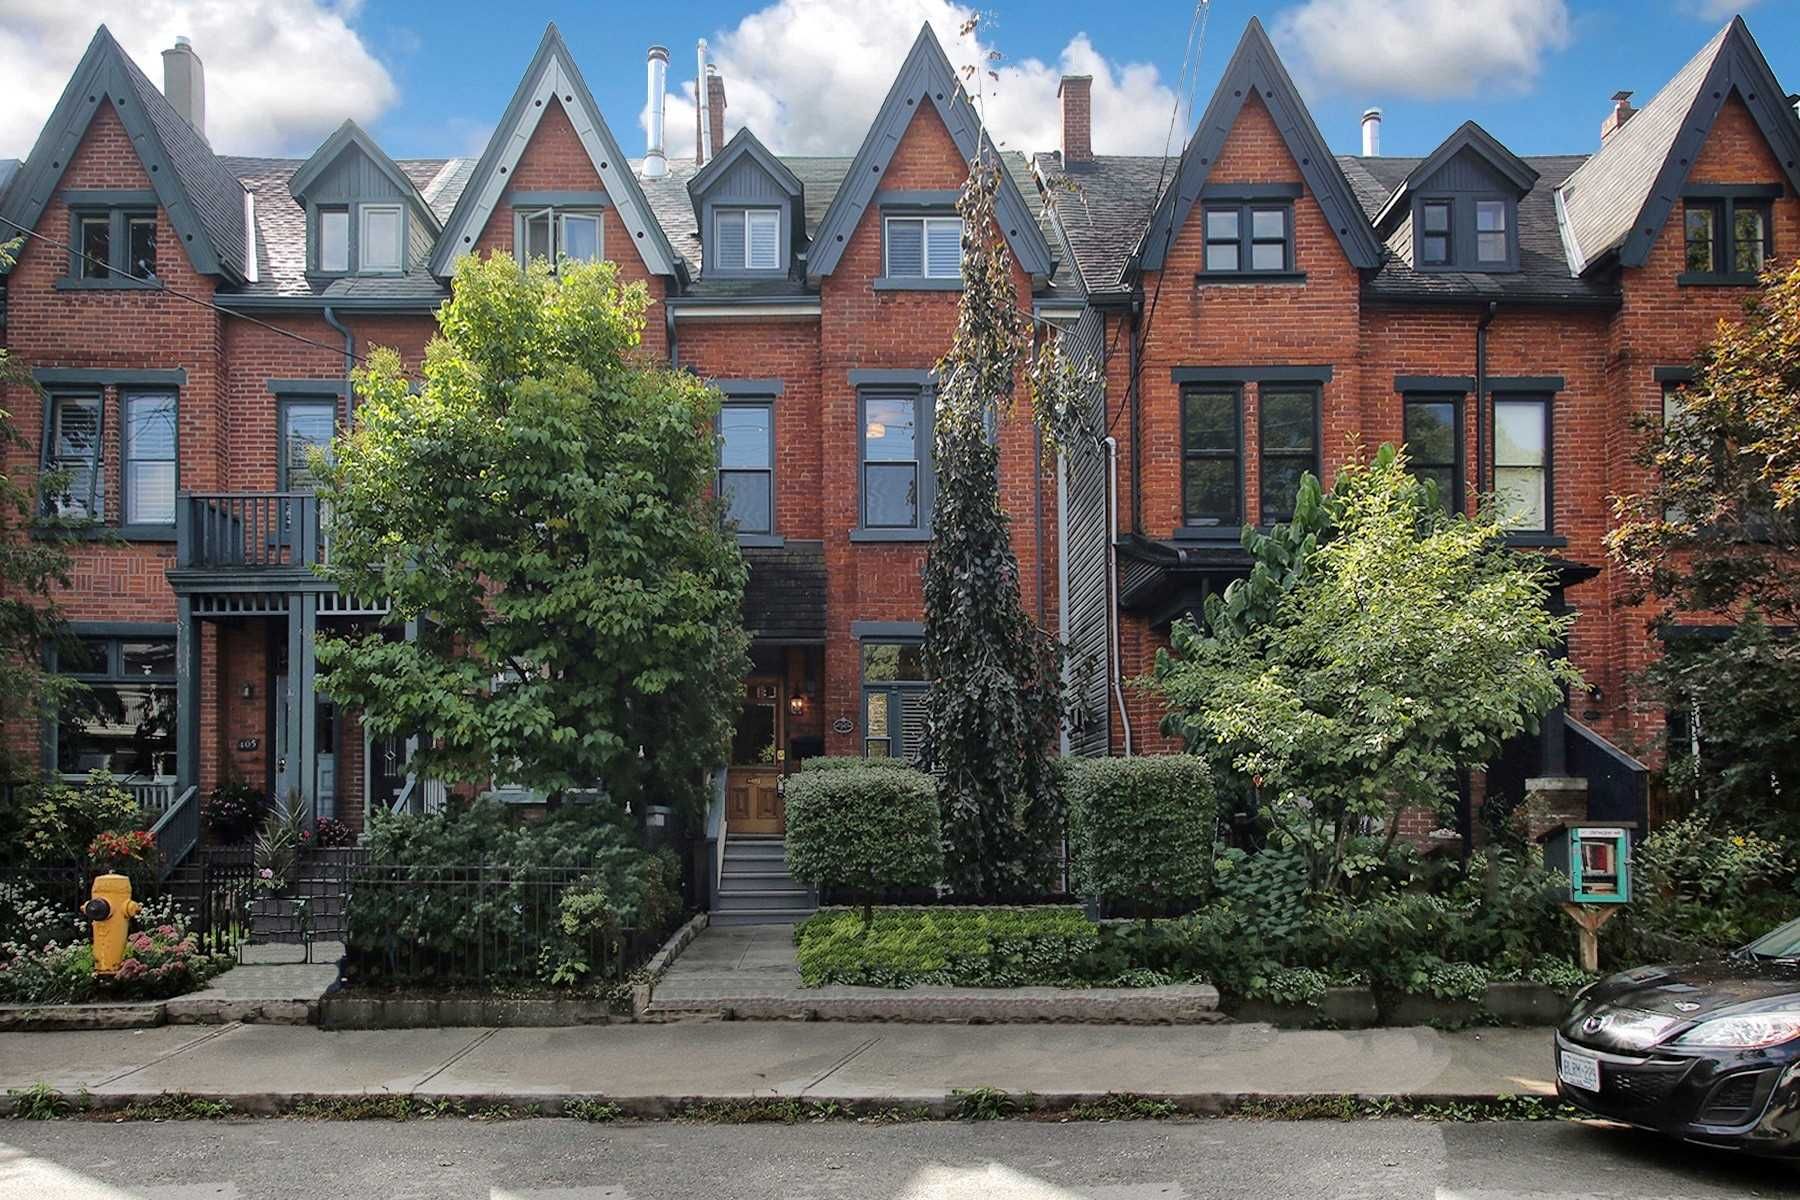 Main Photo: 401 E Wellesley Street in Toronto: Cabbagetown-South St. James Town House (3-Storey) for sale (Toronto C08)  : MLS®# C5385761